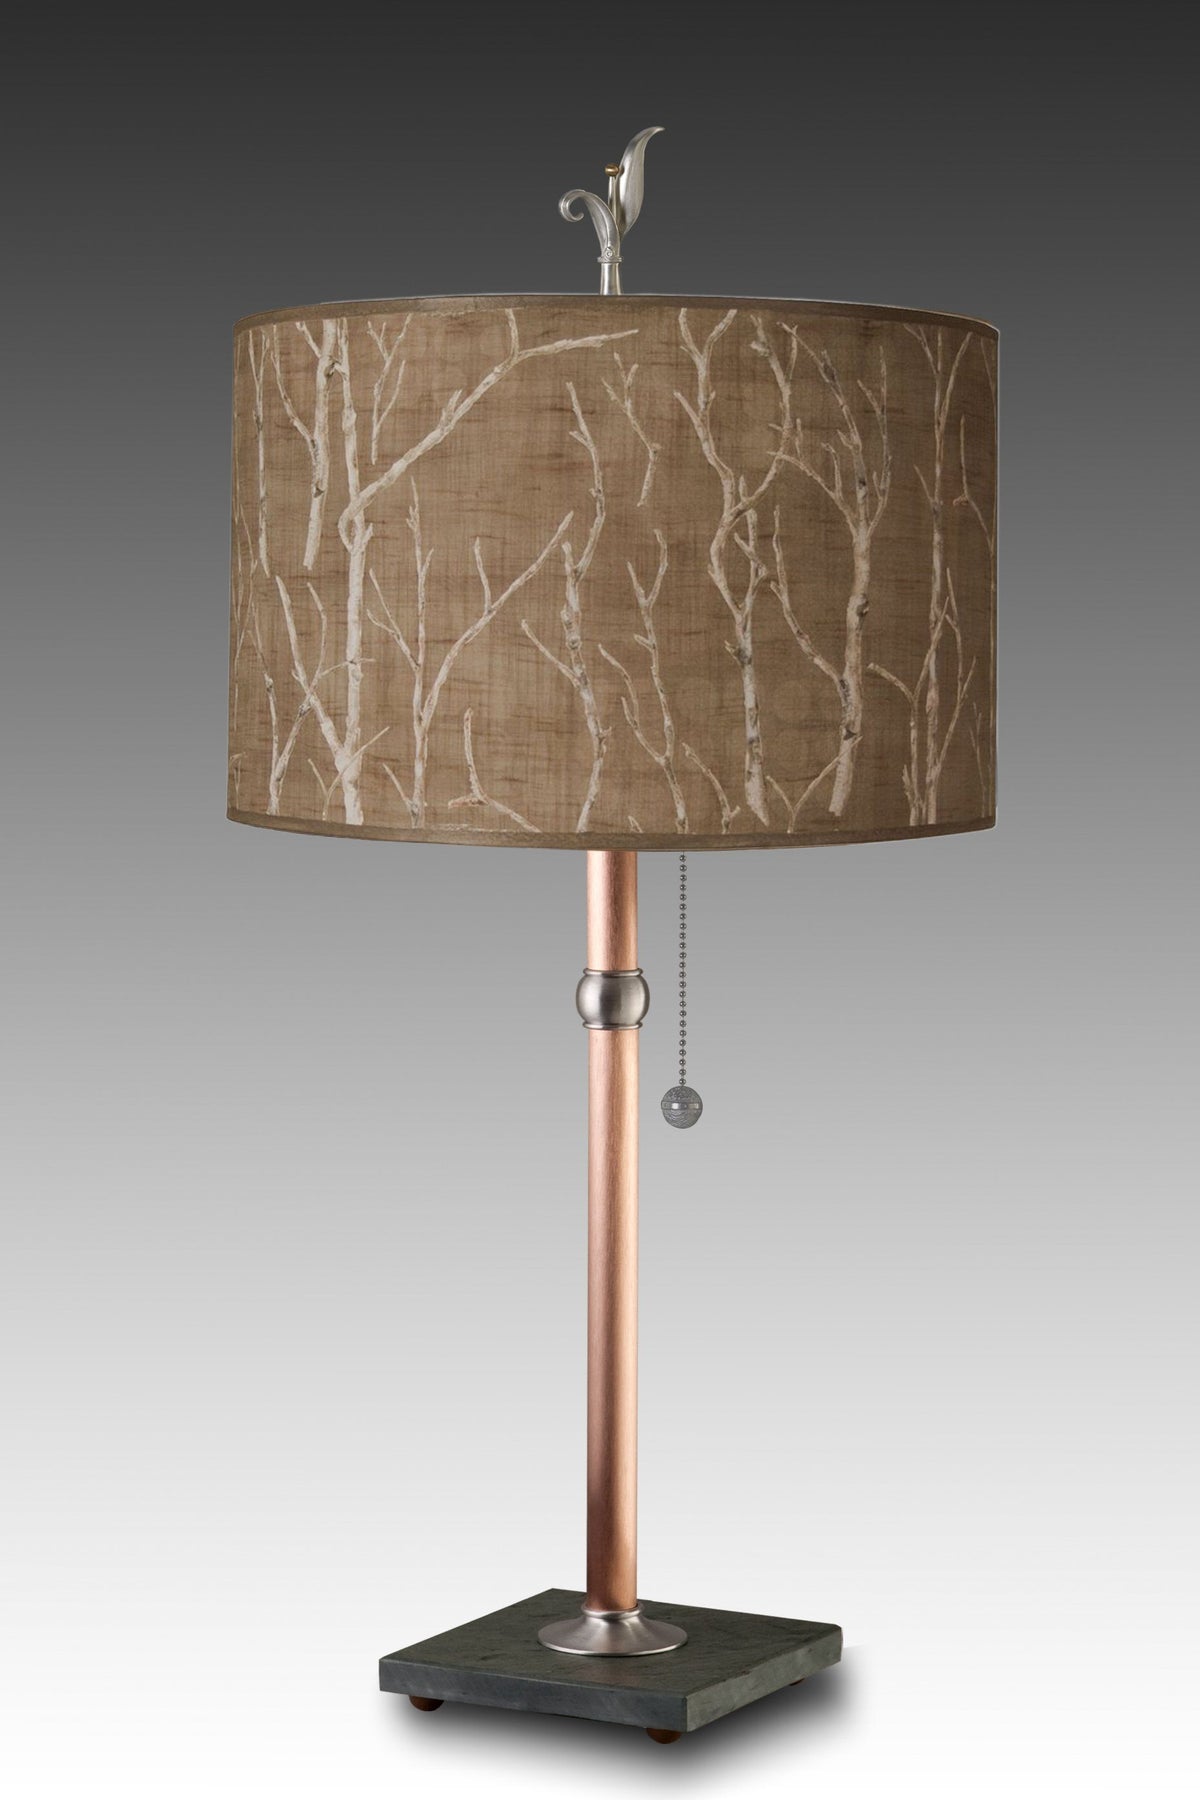 Janna Ugone &amp; Co Table Lamps Copper Table Lamp with Large Drum Shade in Twigs